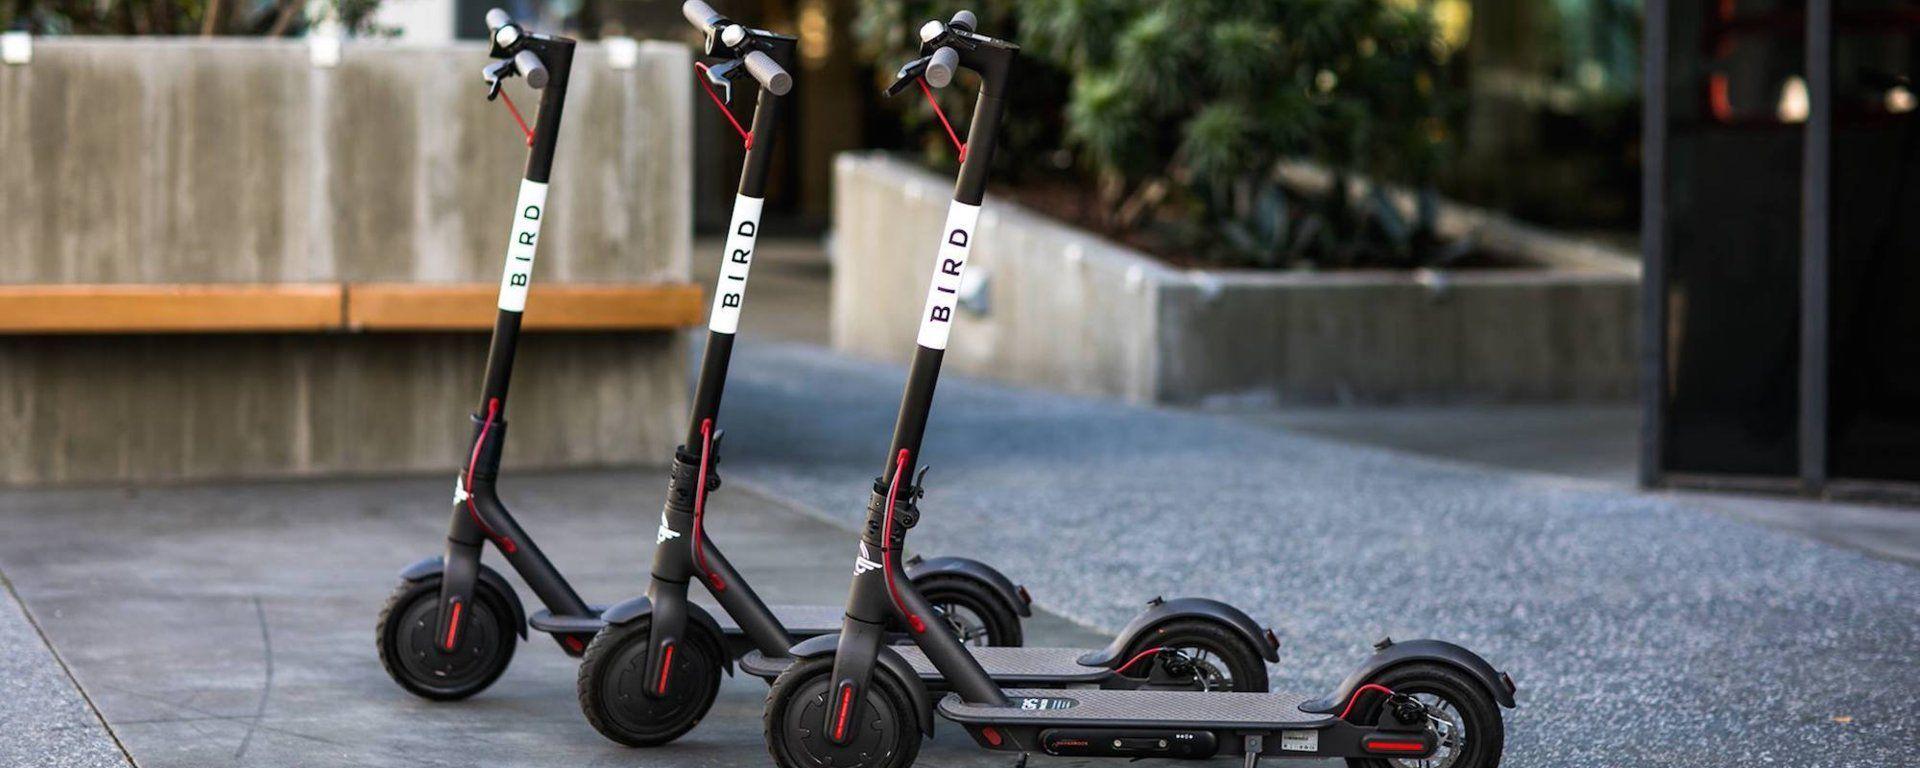 E-scooters on campus